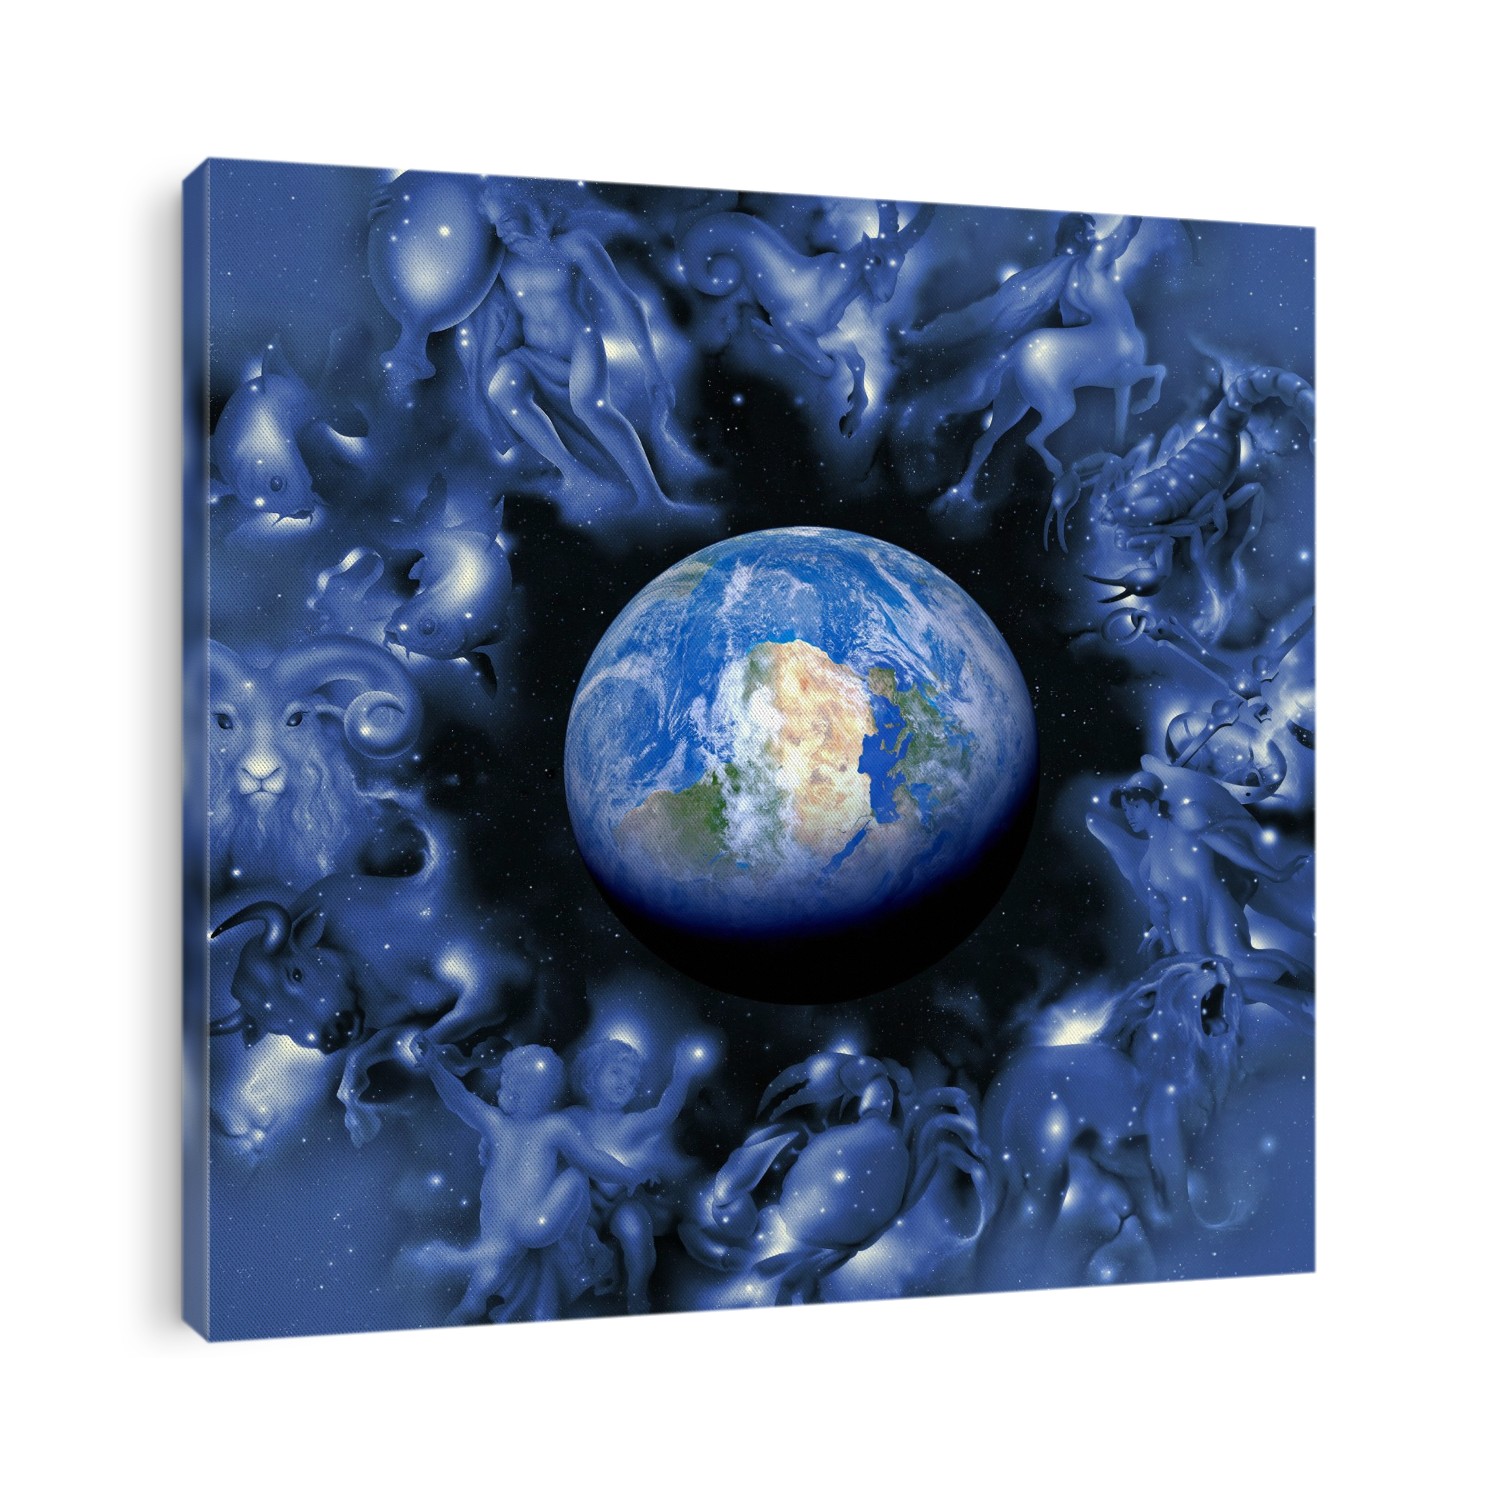 Earth and star signs. Computer artwork of the Earth surrounded by depictions of the signs of the zodiac.